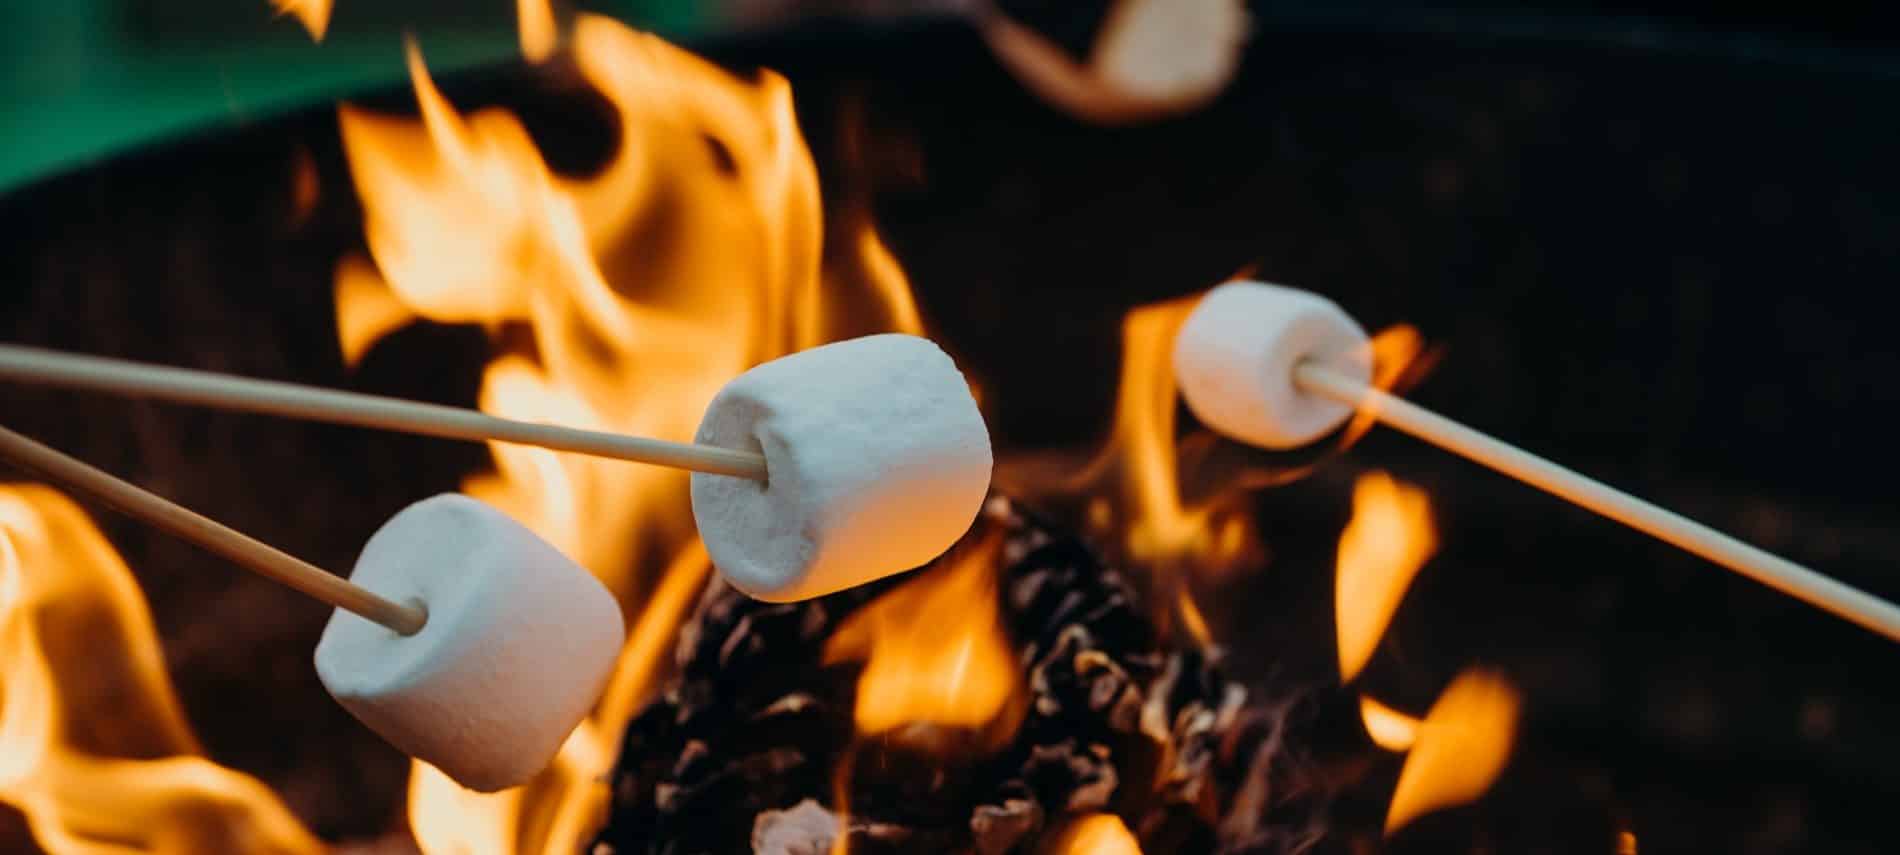 Roaring fire with several wooden sticks holding fresh white marshmallows being roasted